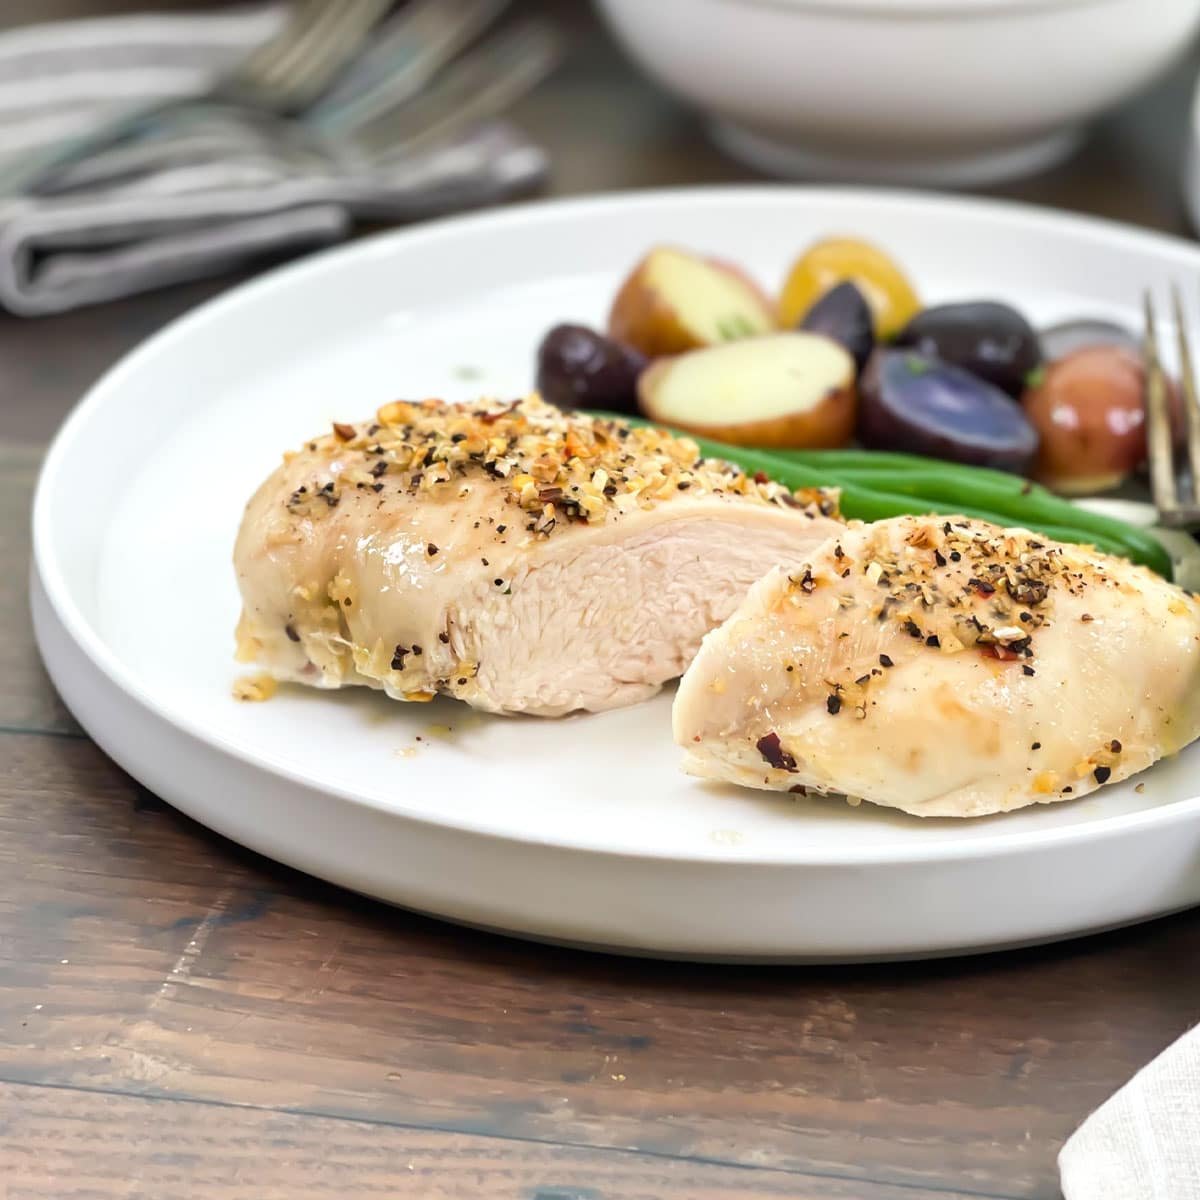 Seasoned baked chicken breast cut in half on a white plate with green beans and potatoes.